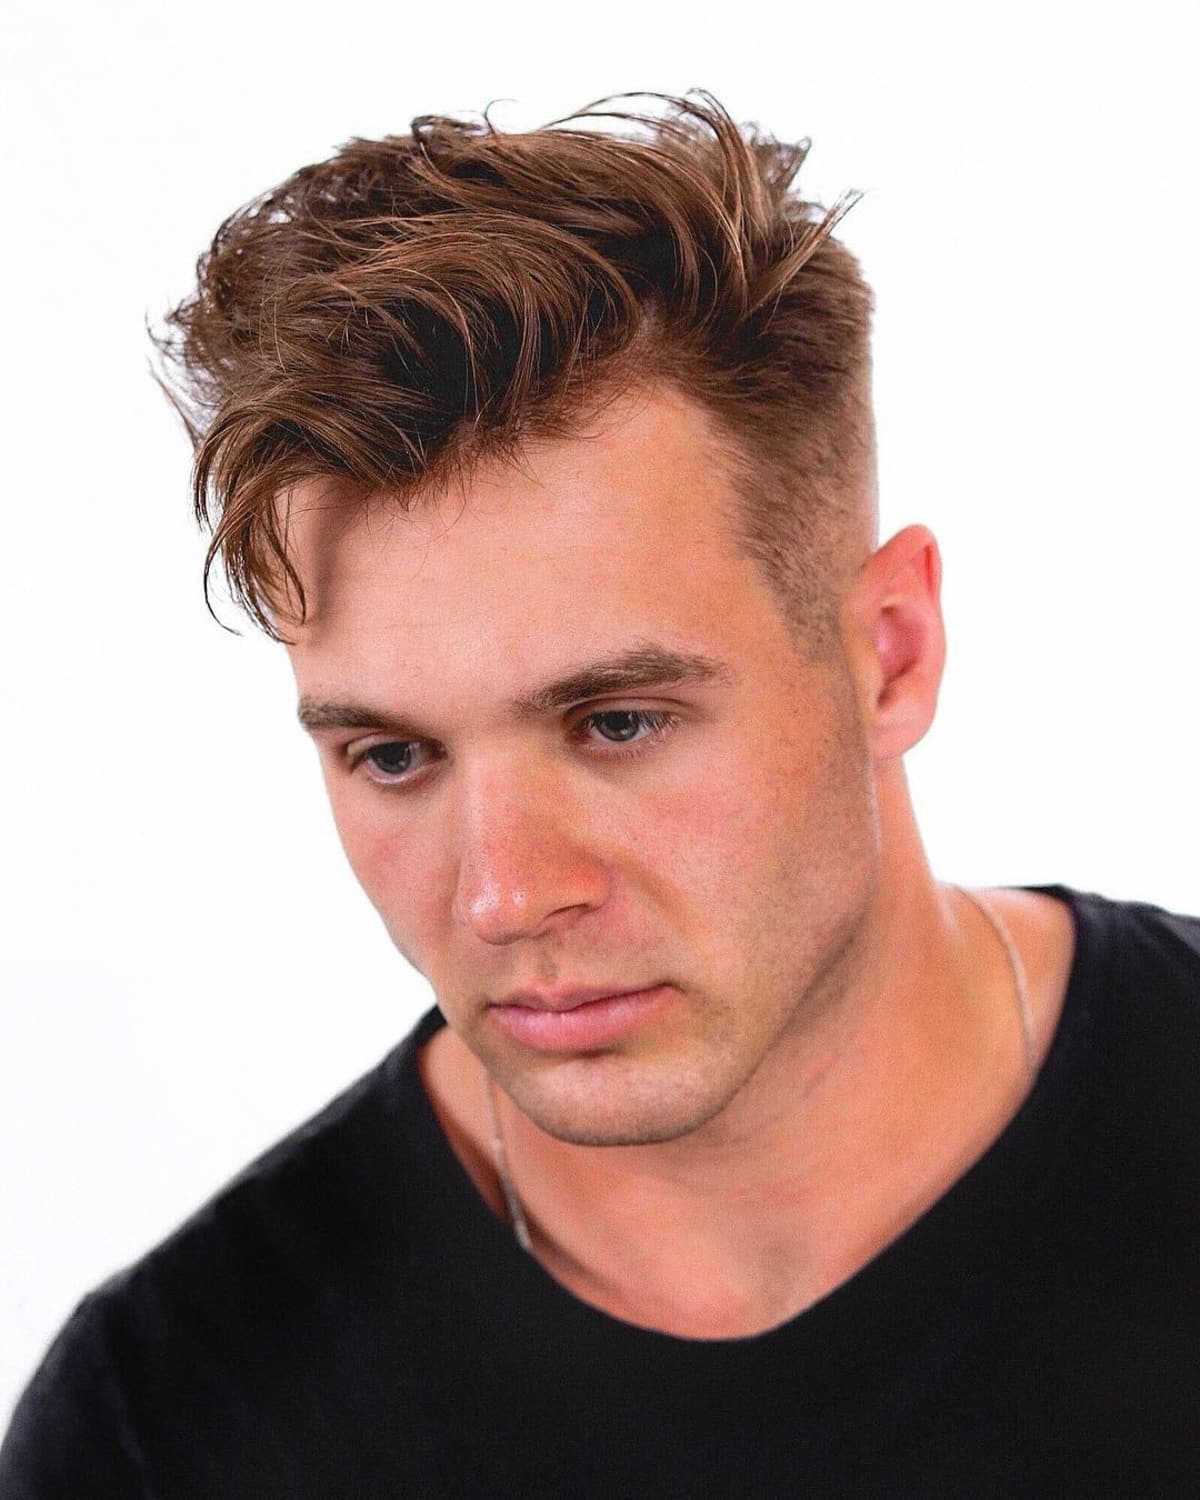 Tousled side quiffed hair for men